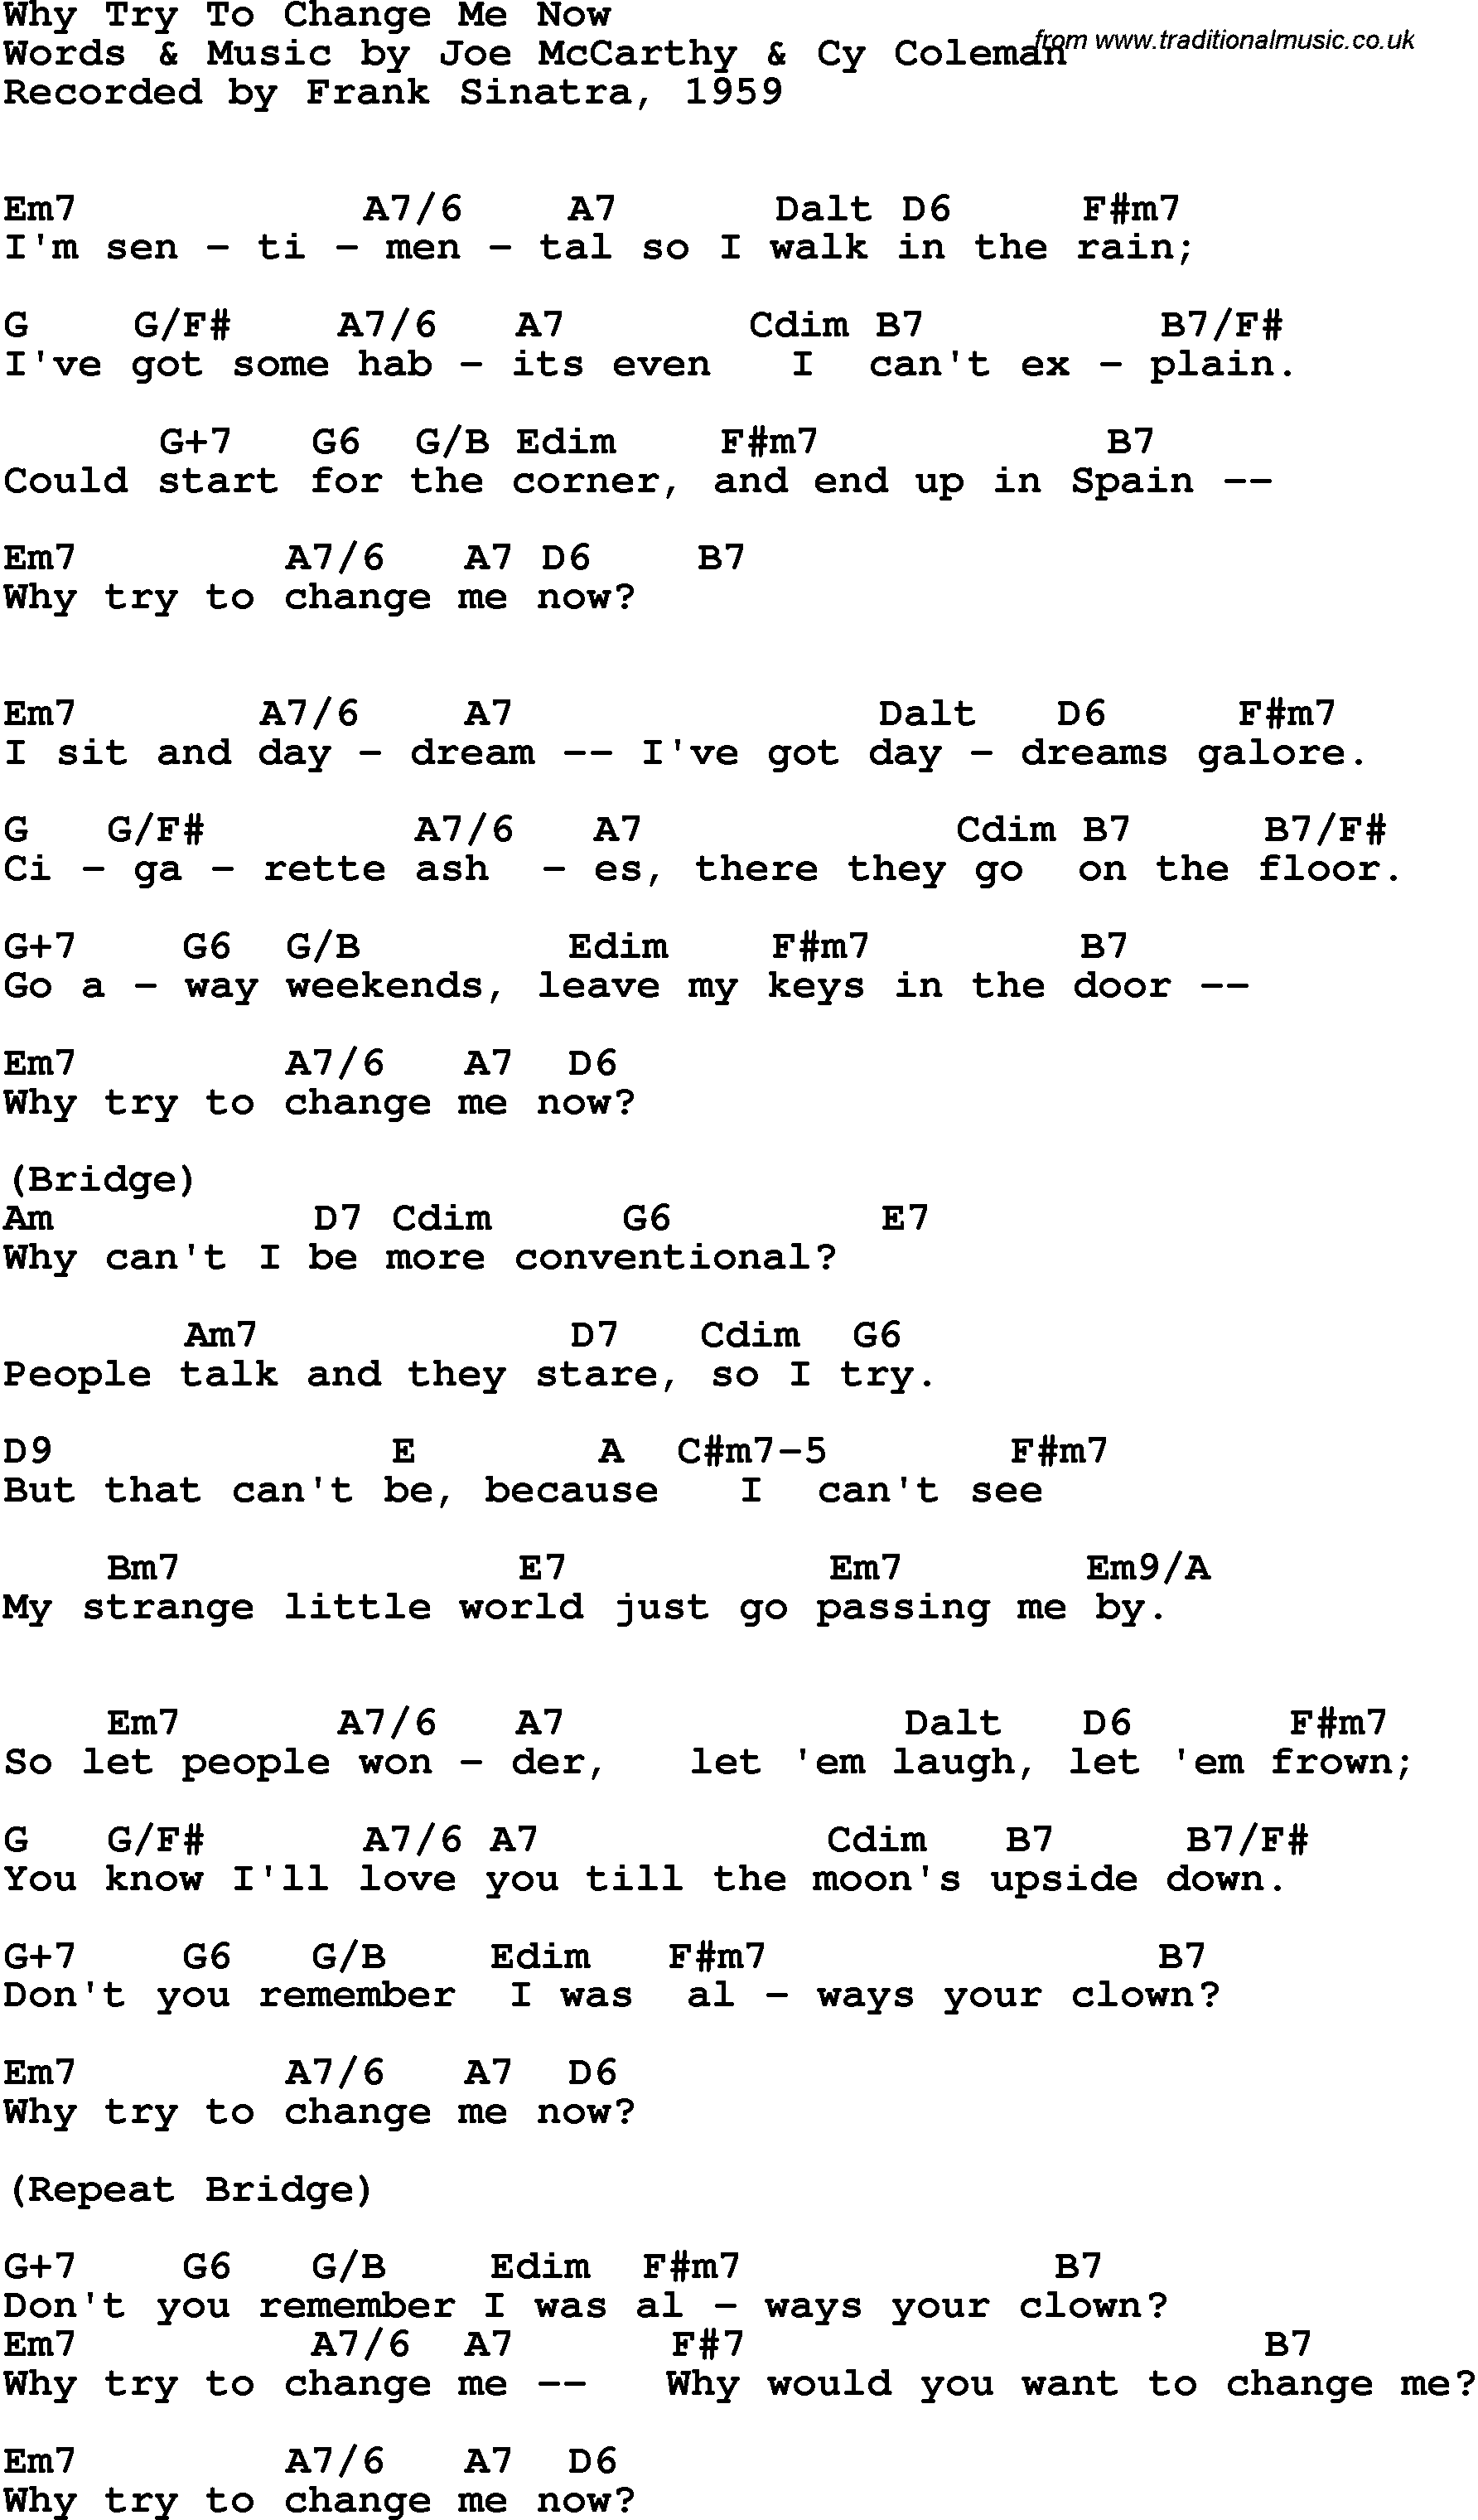 Song Lyrics with guitar chords for Why Try To Change Me Now - Frank Sinatra, 1959